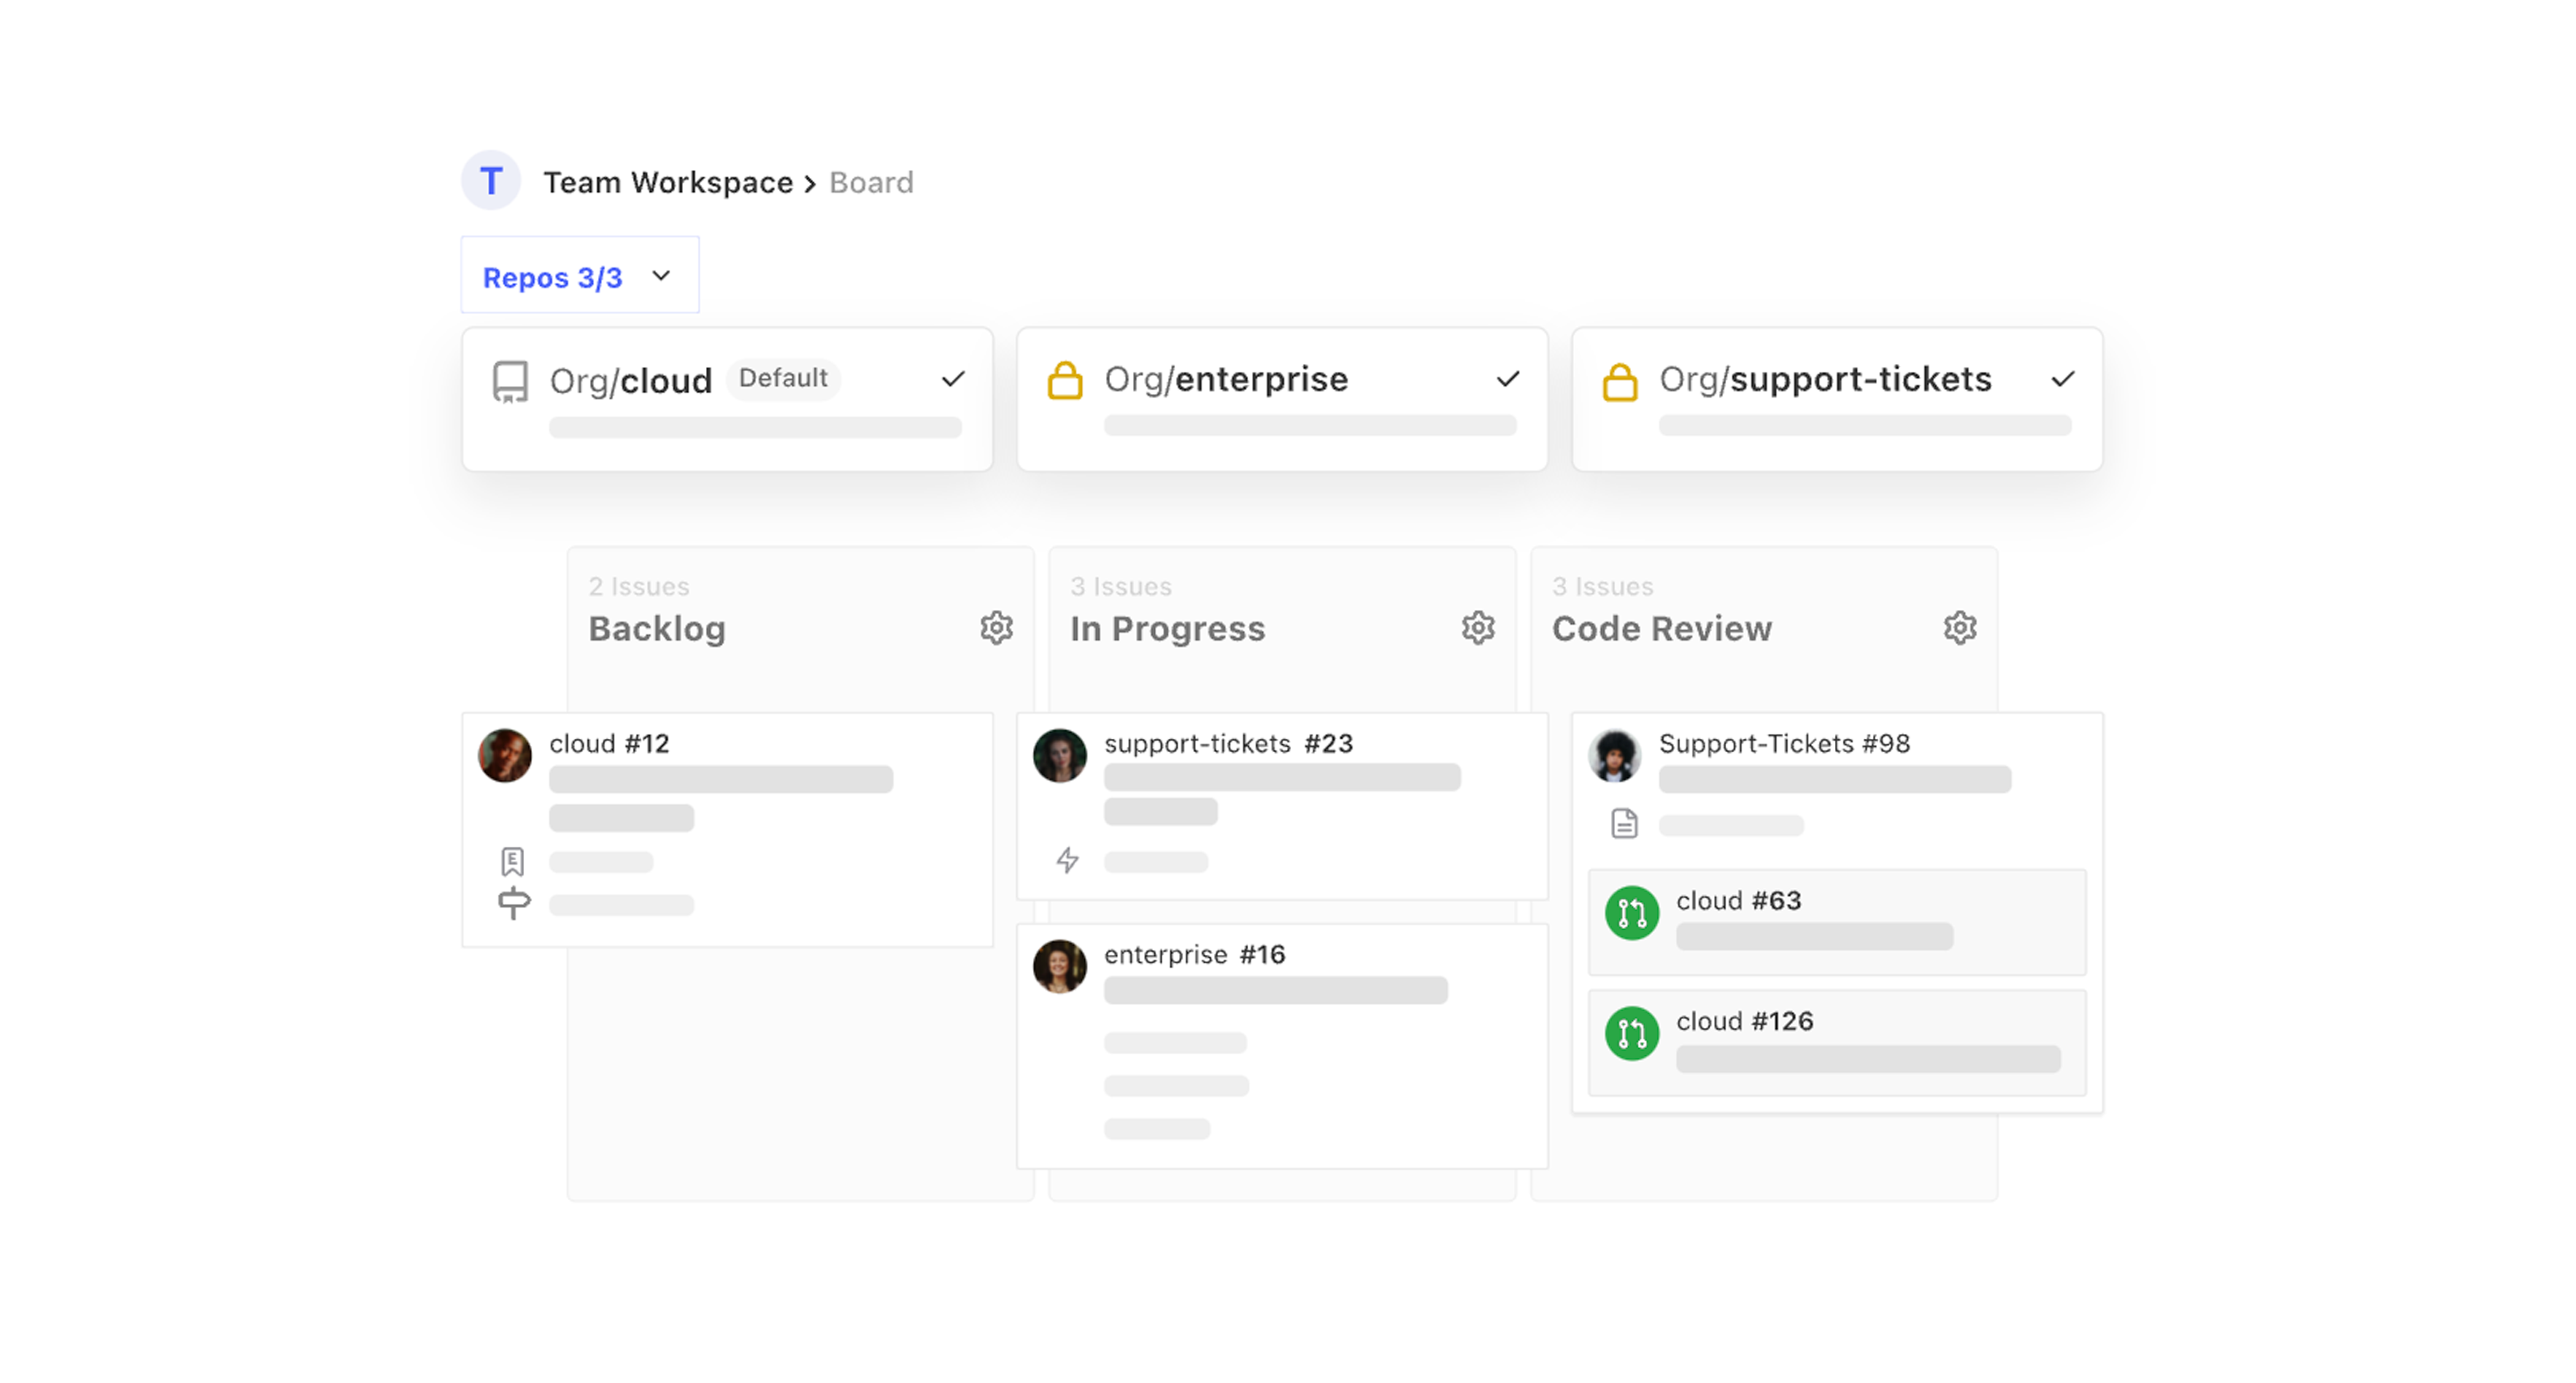 Add multiple repos to and customize your team's workspace board